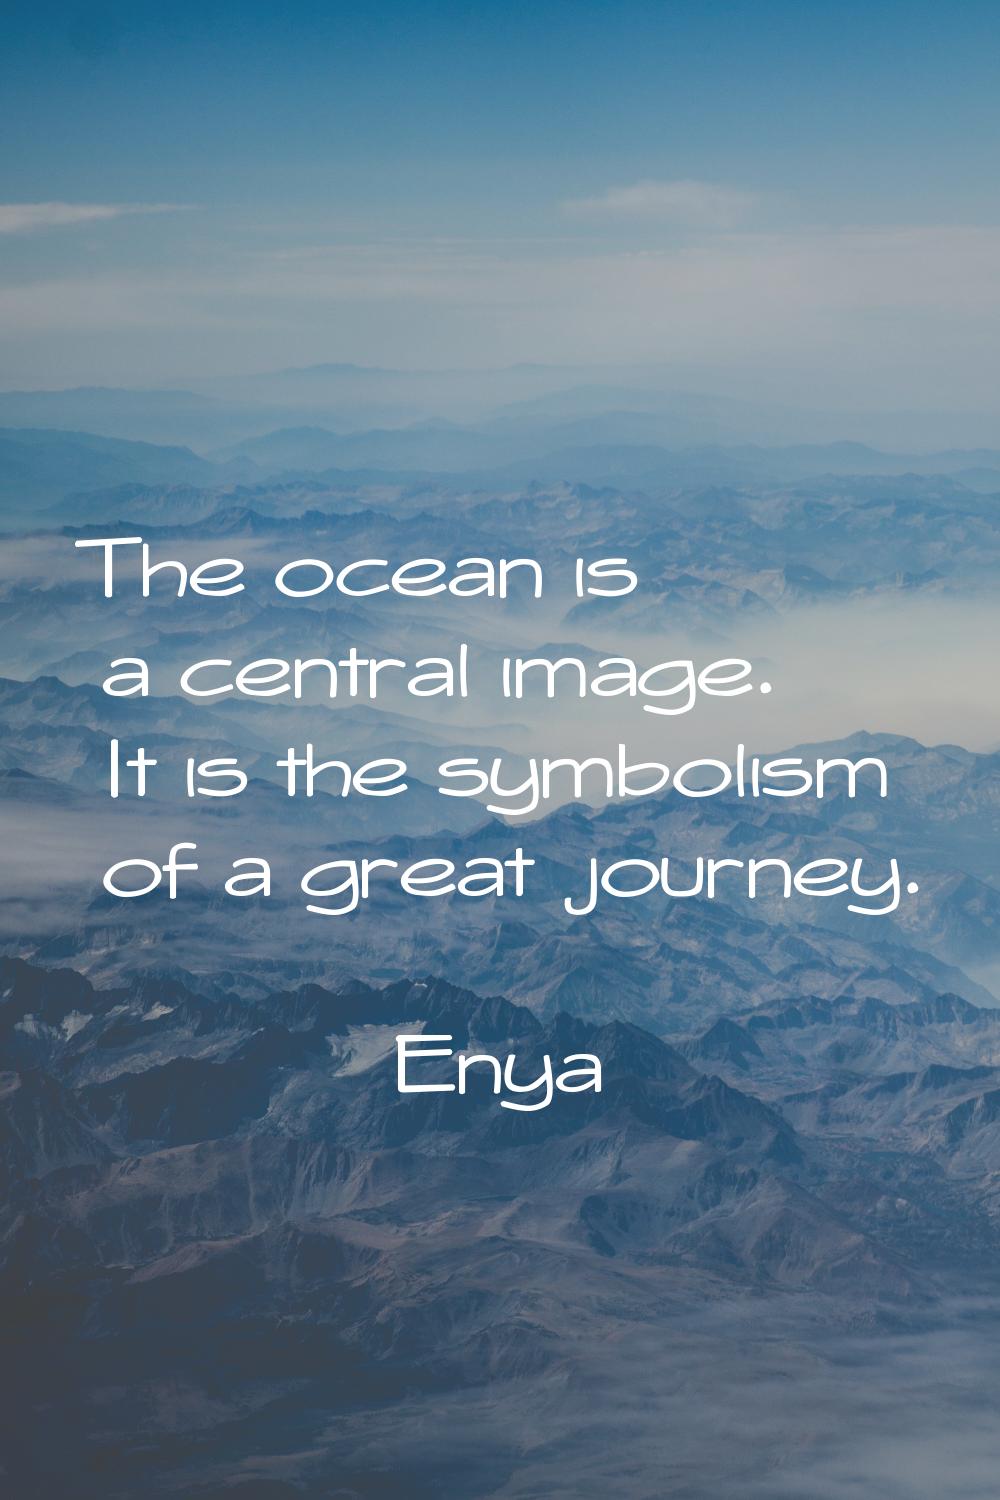 The ocean is a central image. It is the symbolism of a great journey.